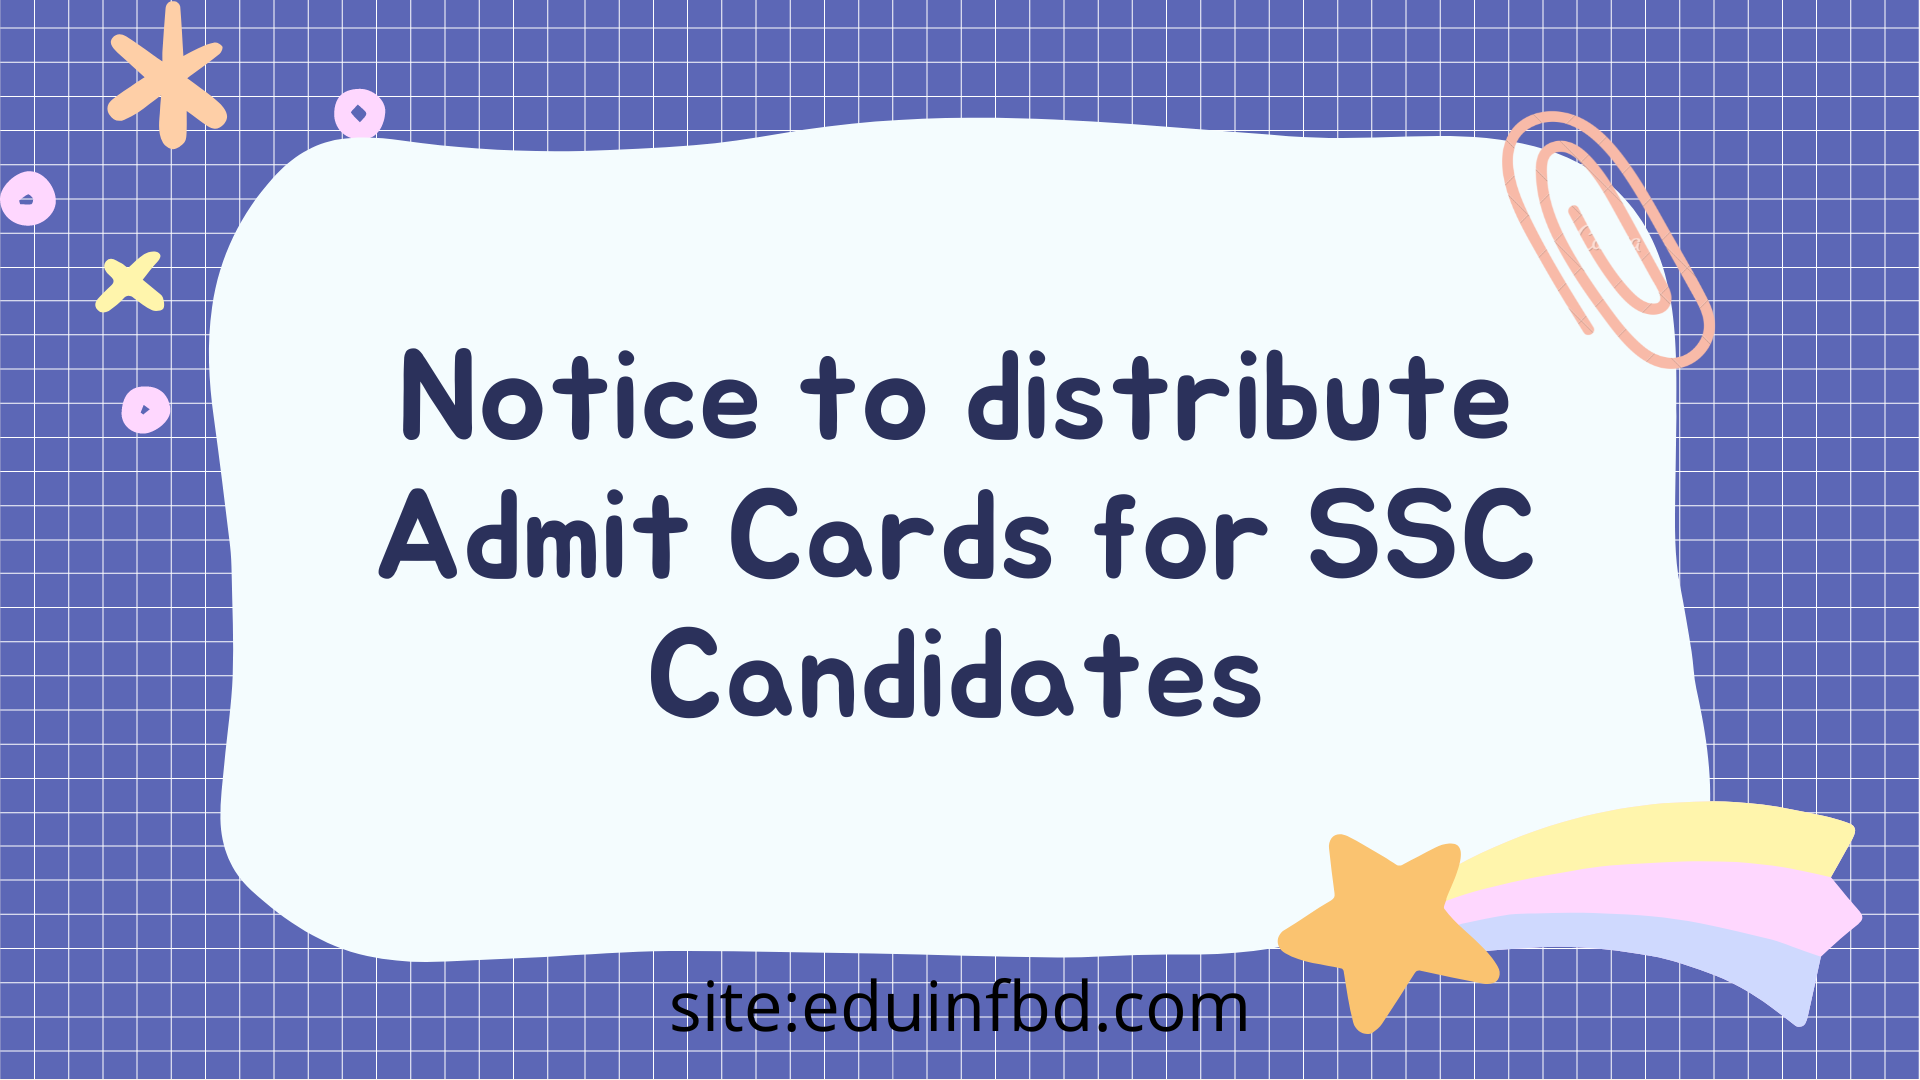 Notice to distribute Admit Cards for SSC Candidates